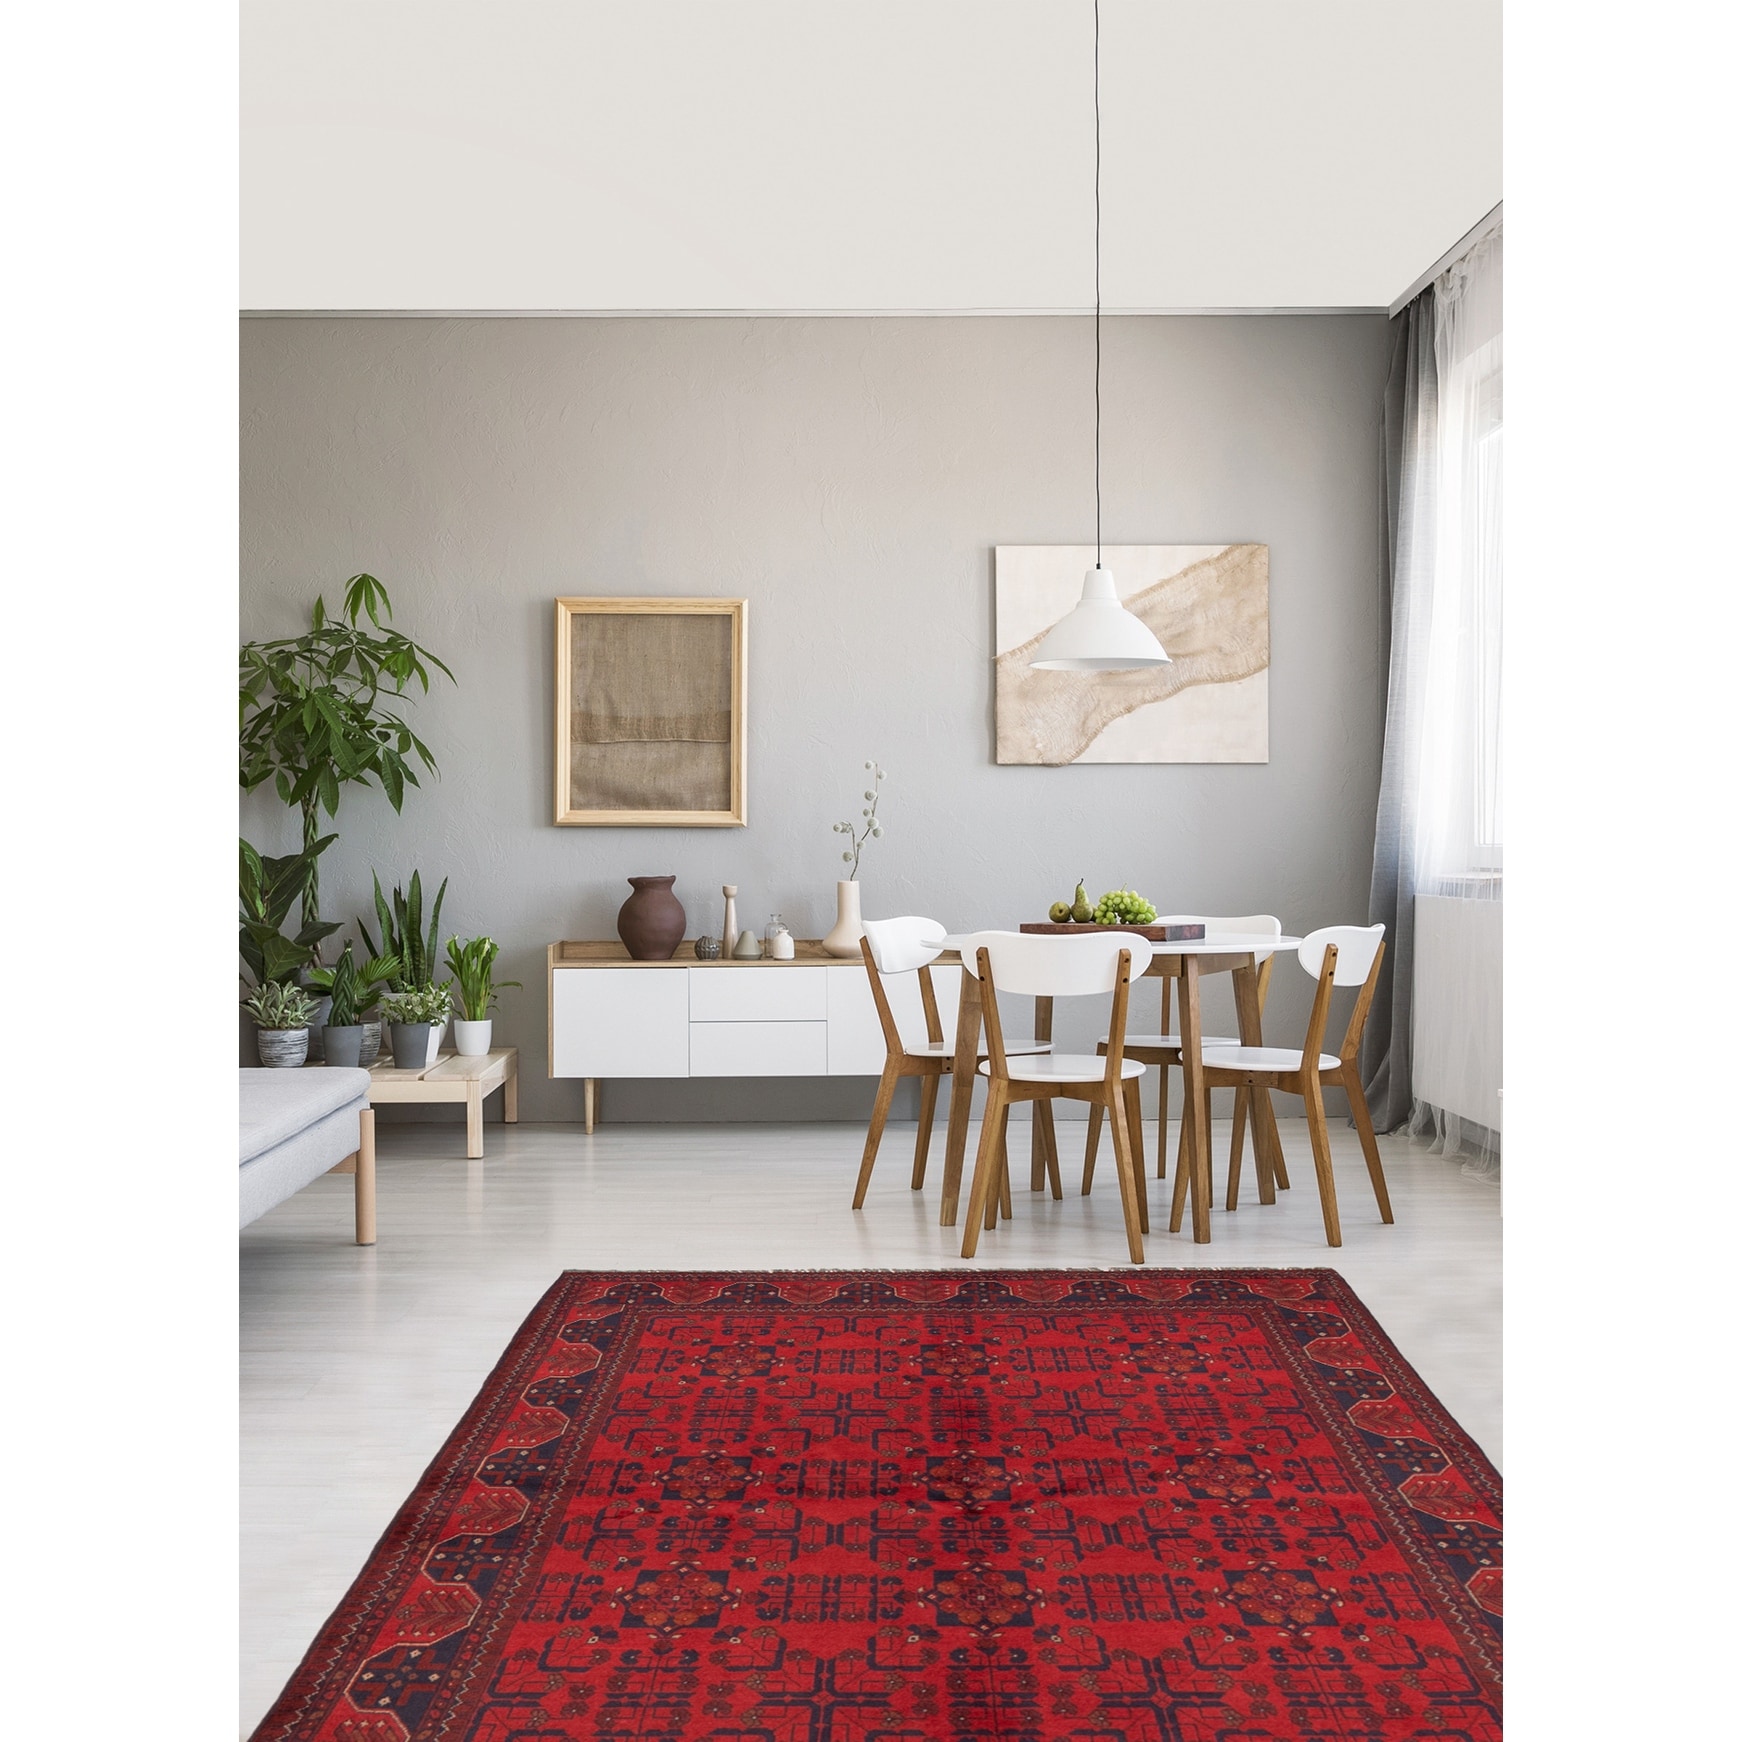 360377 Bedroom Finest Khal Mohammadi Bordered Red Rug 5'9 x 7'5 eCarpet Gallery Area Rug for Living Room Hand-Knotted Wool Rug 